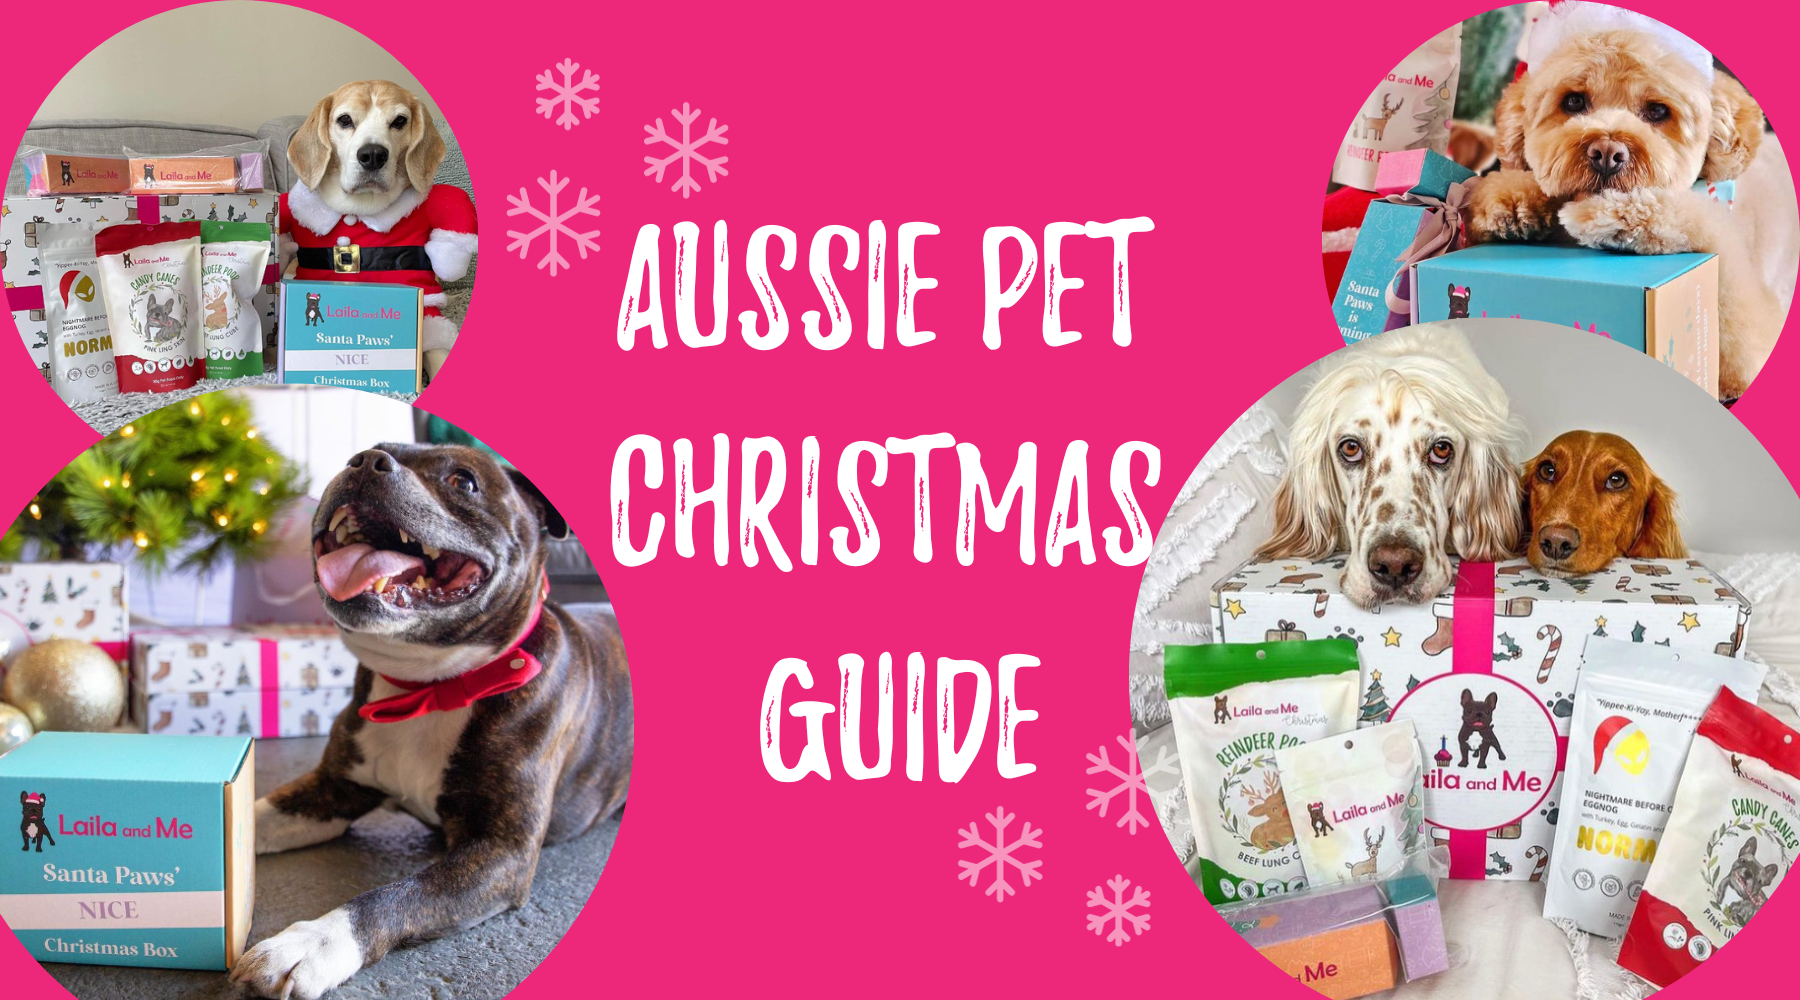 Aussie Pet Christmas Guide - Laila and Me